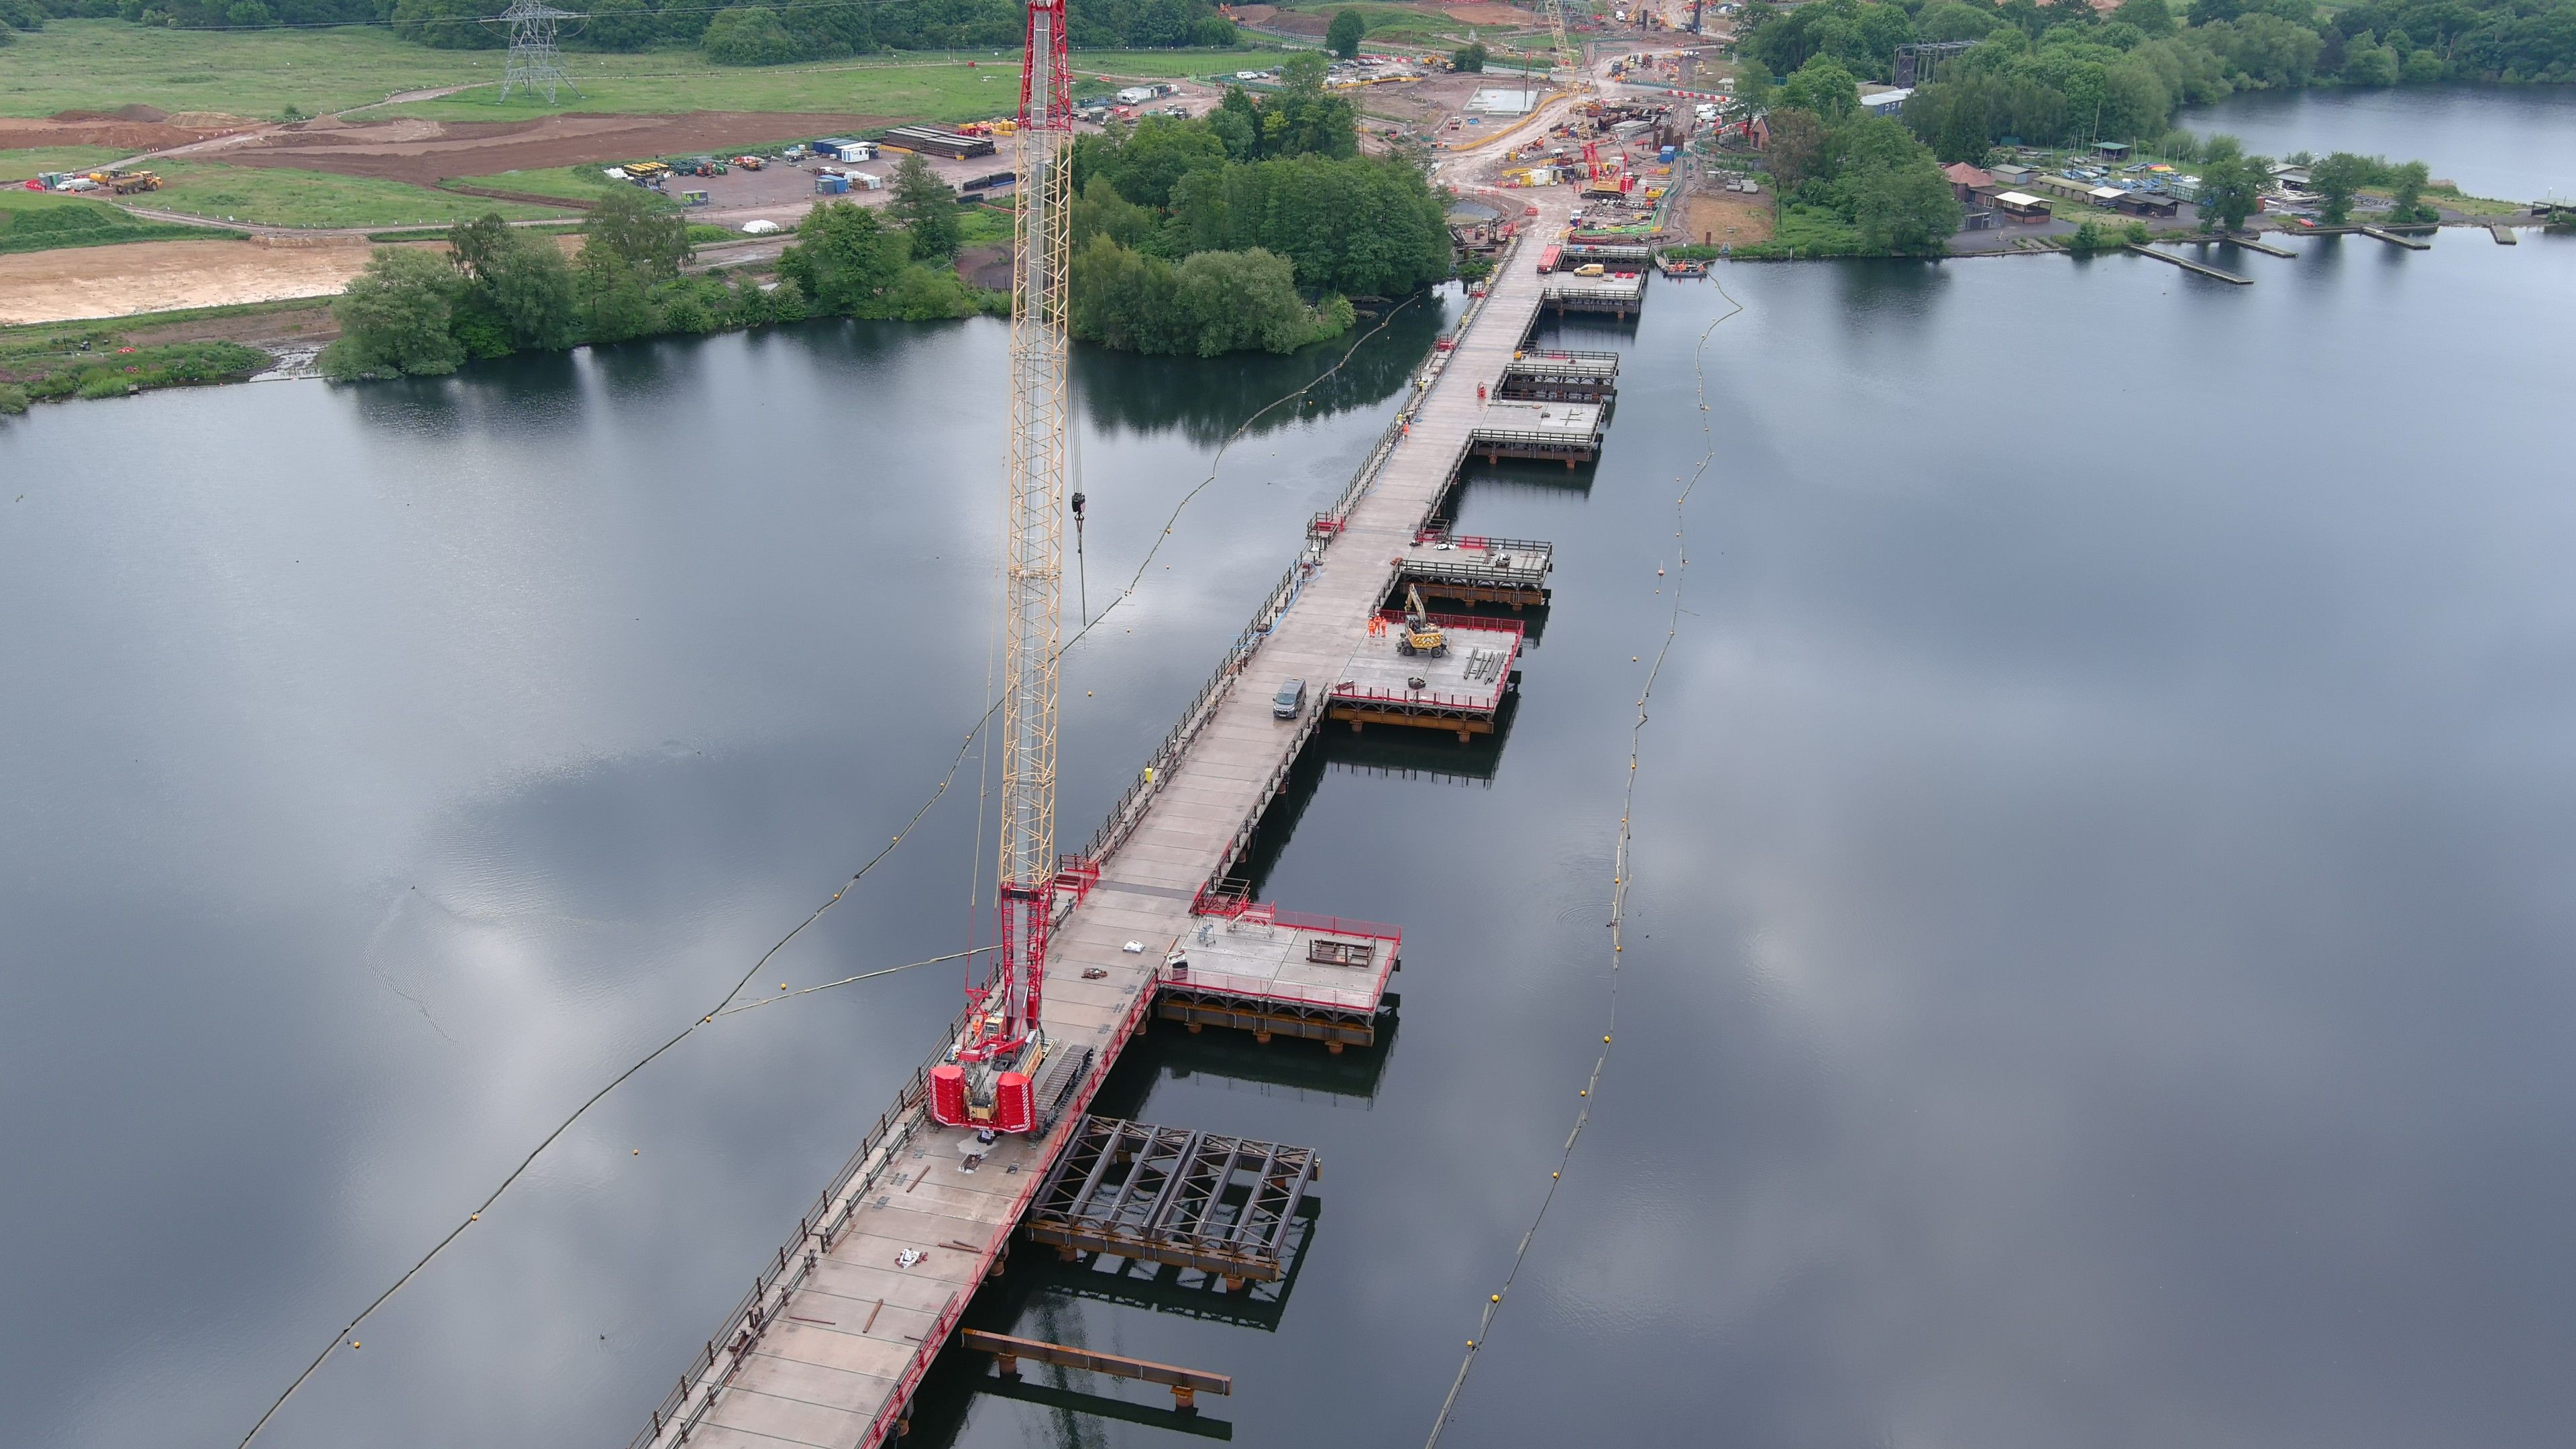 Millcroft provides scaffolding to support the construction of the HS2 Colne Valley Viaduct after unique water training to complete the job